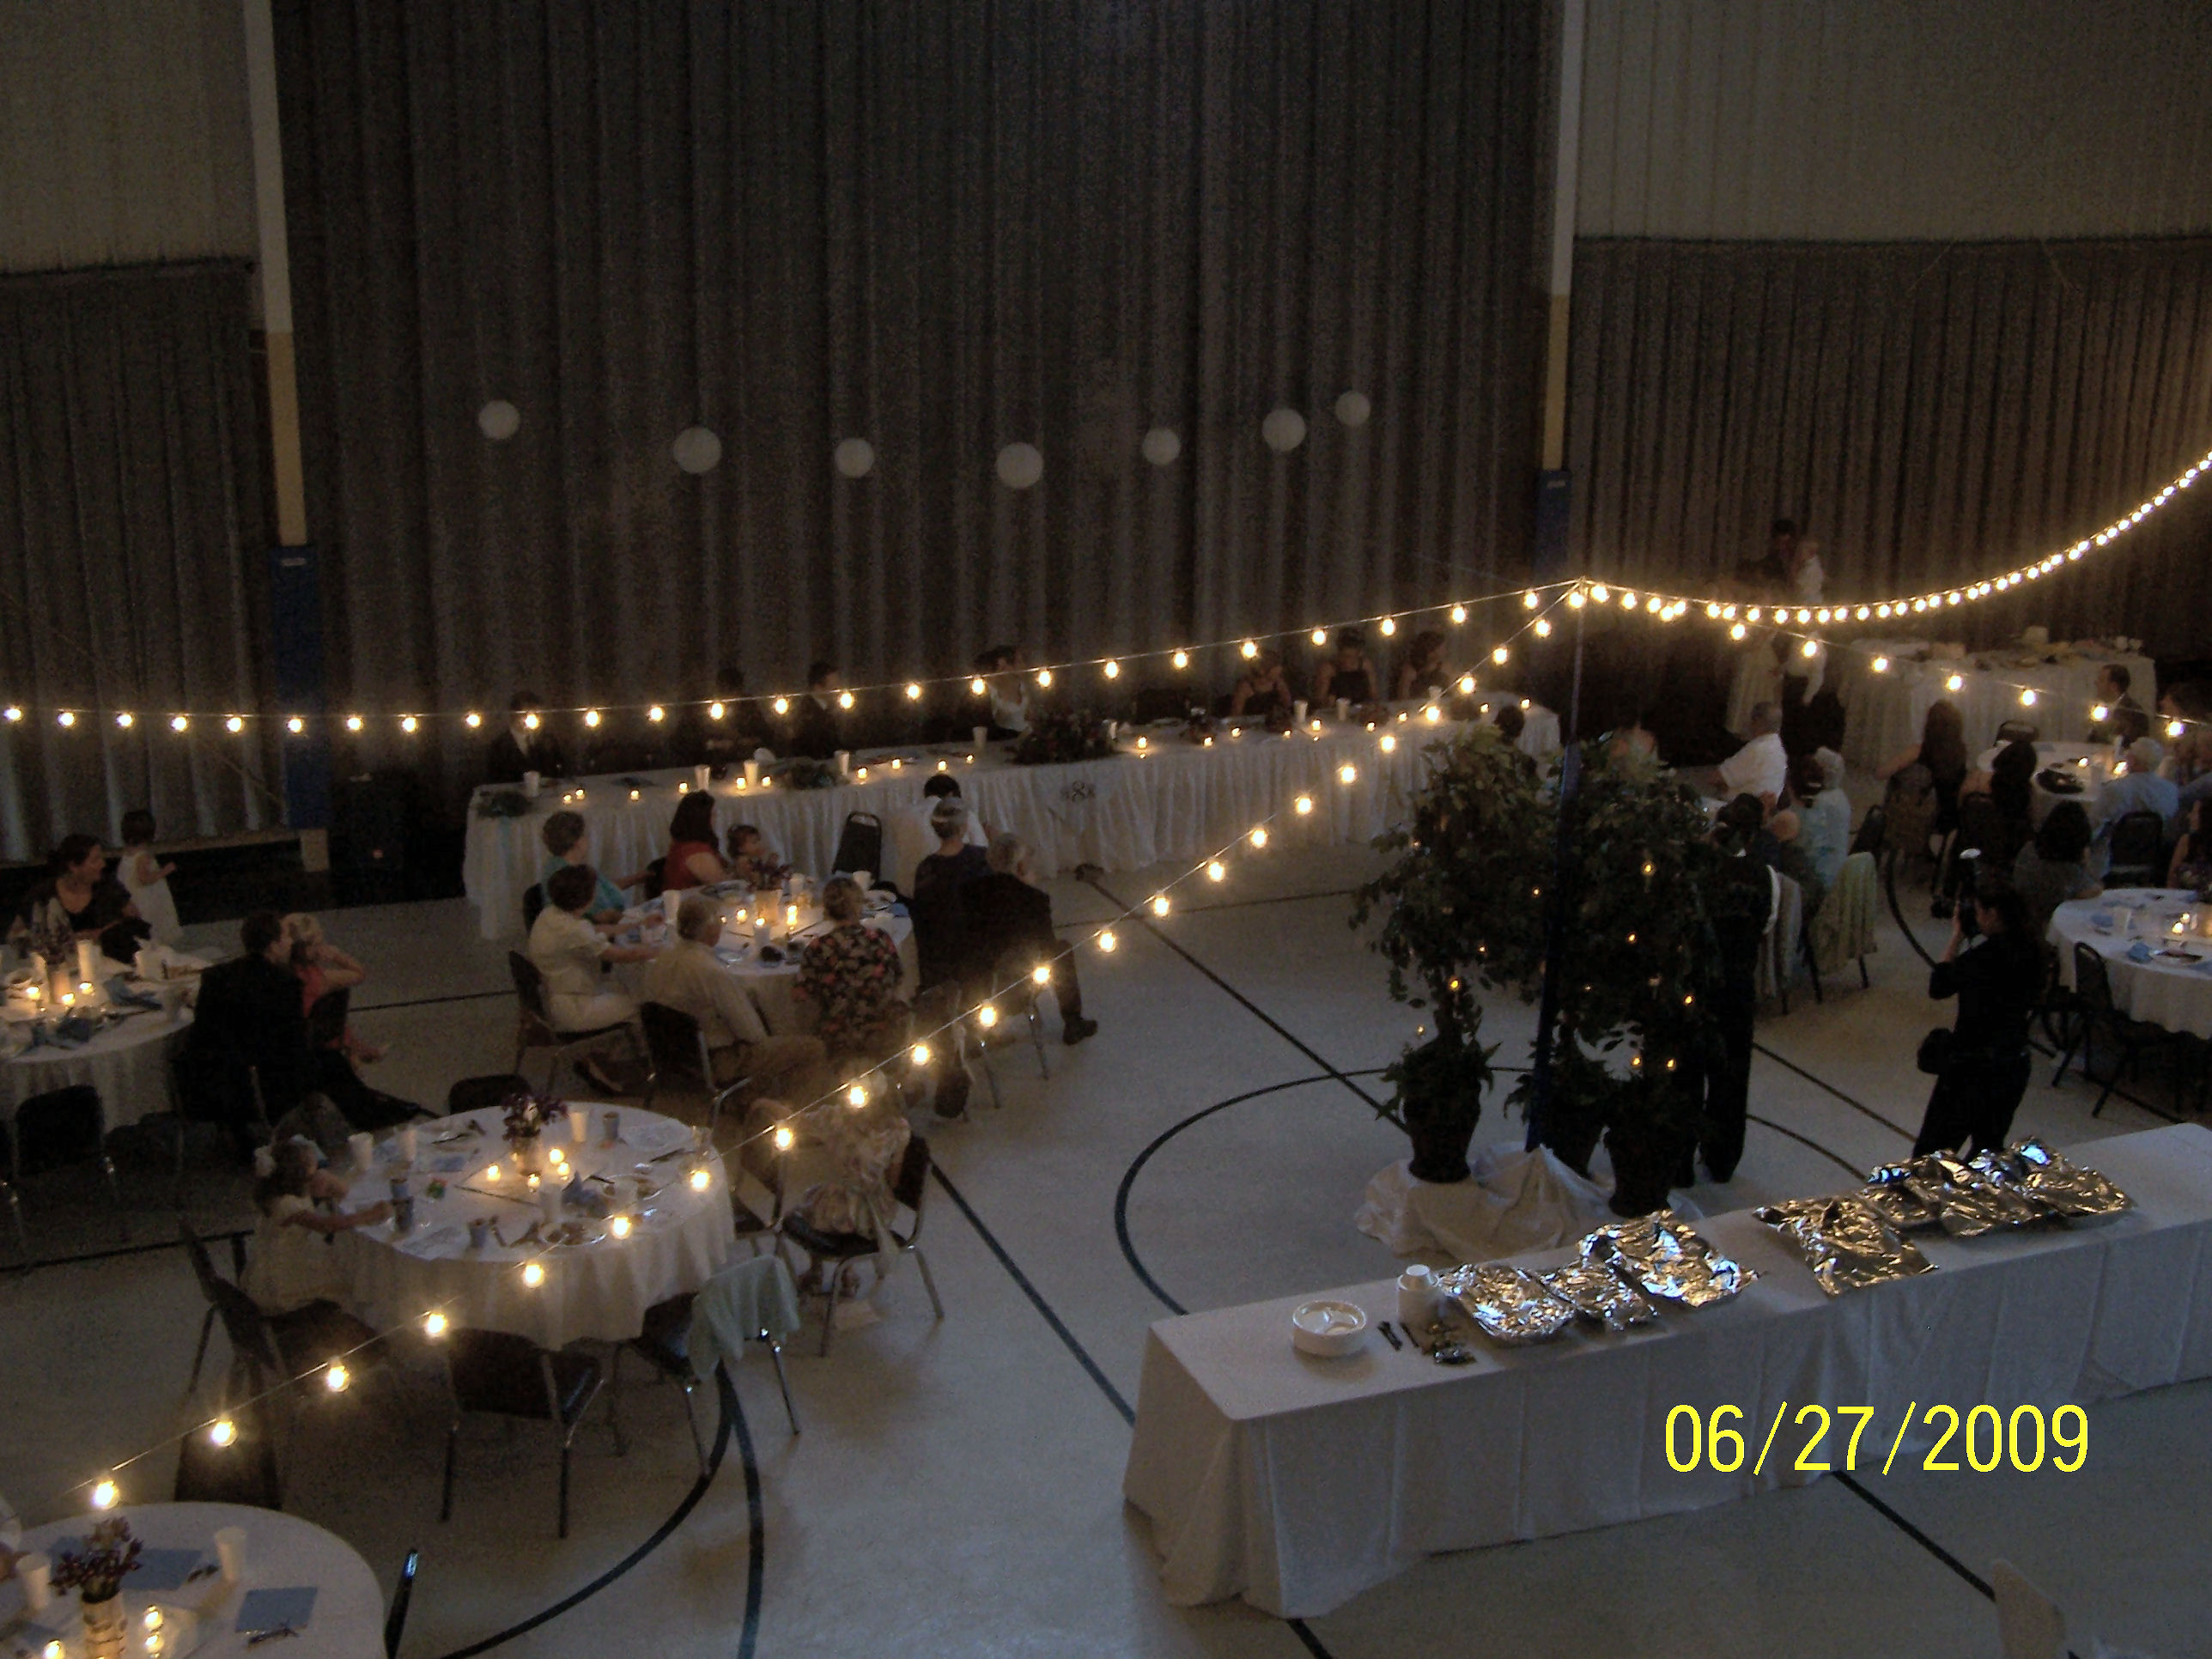 The New Gym decorated for wedding reception